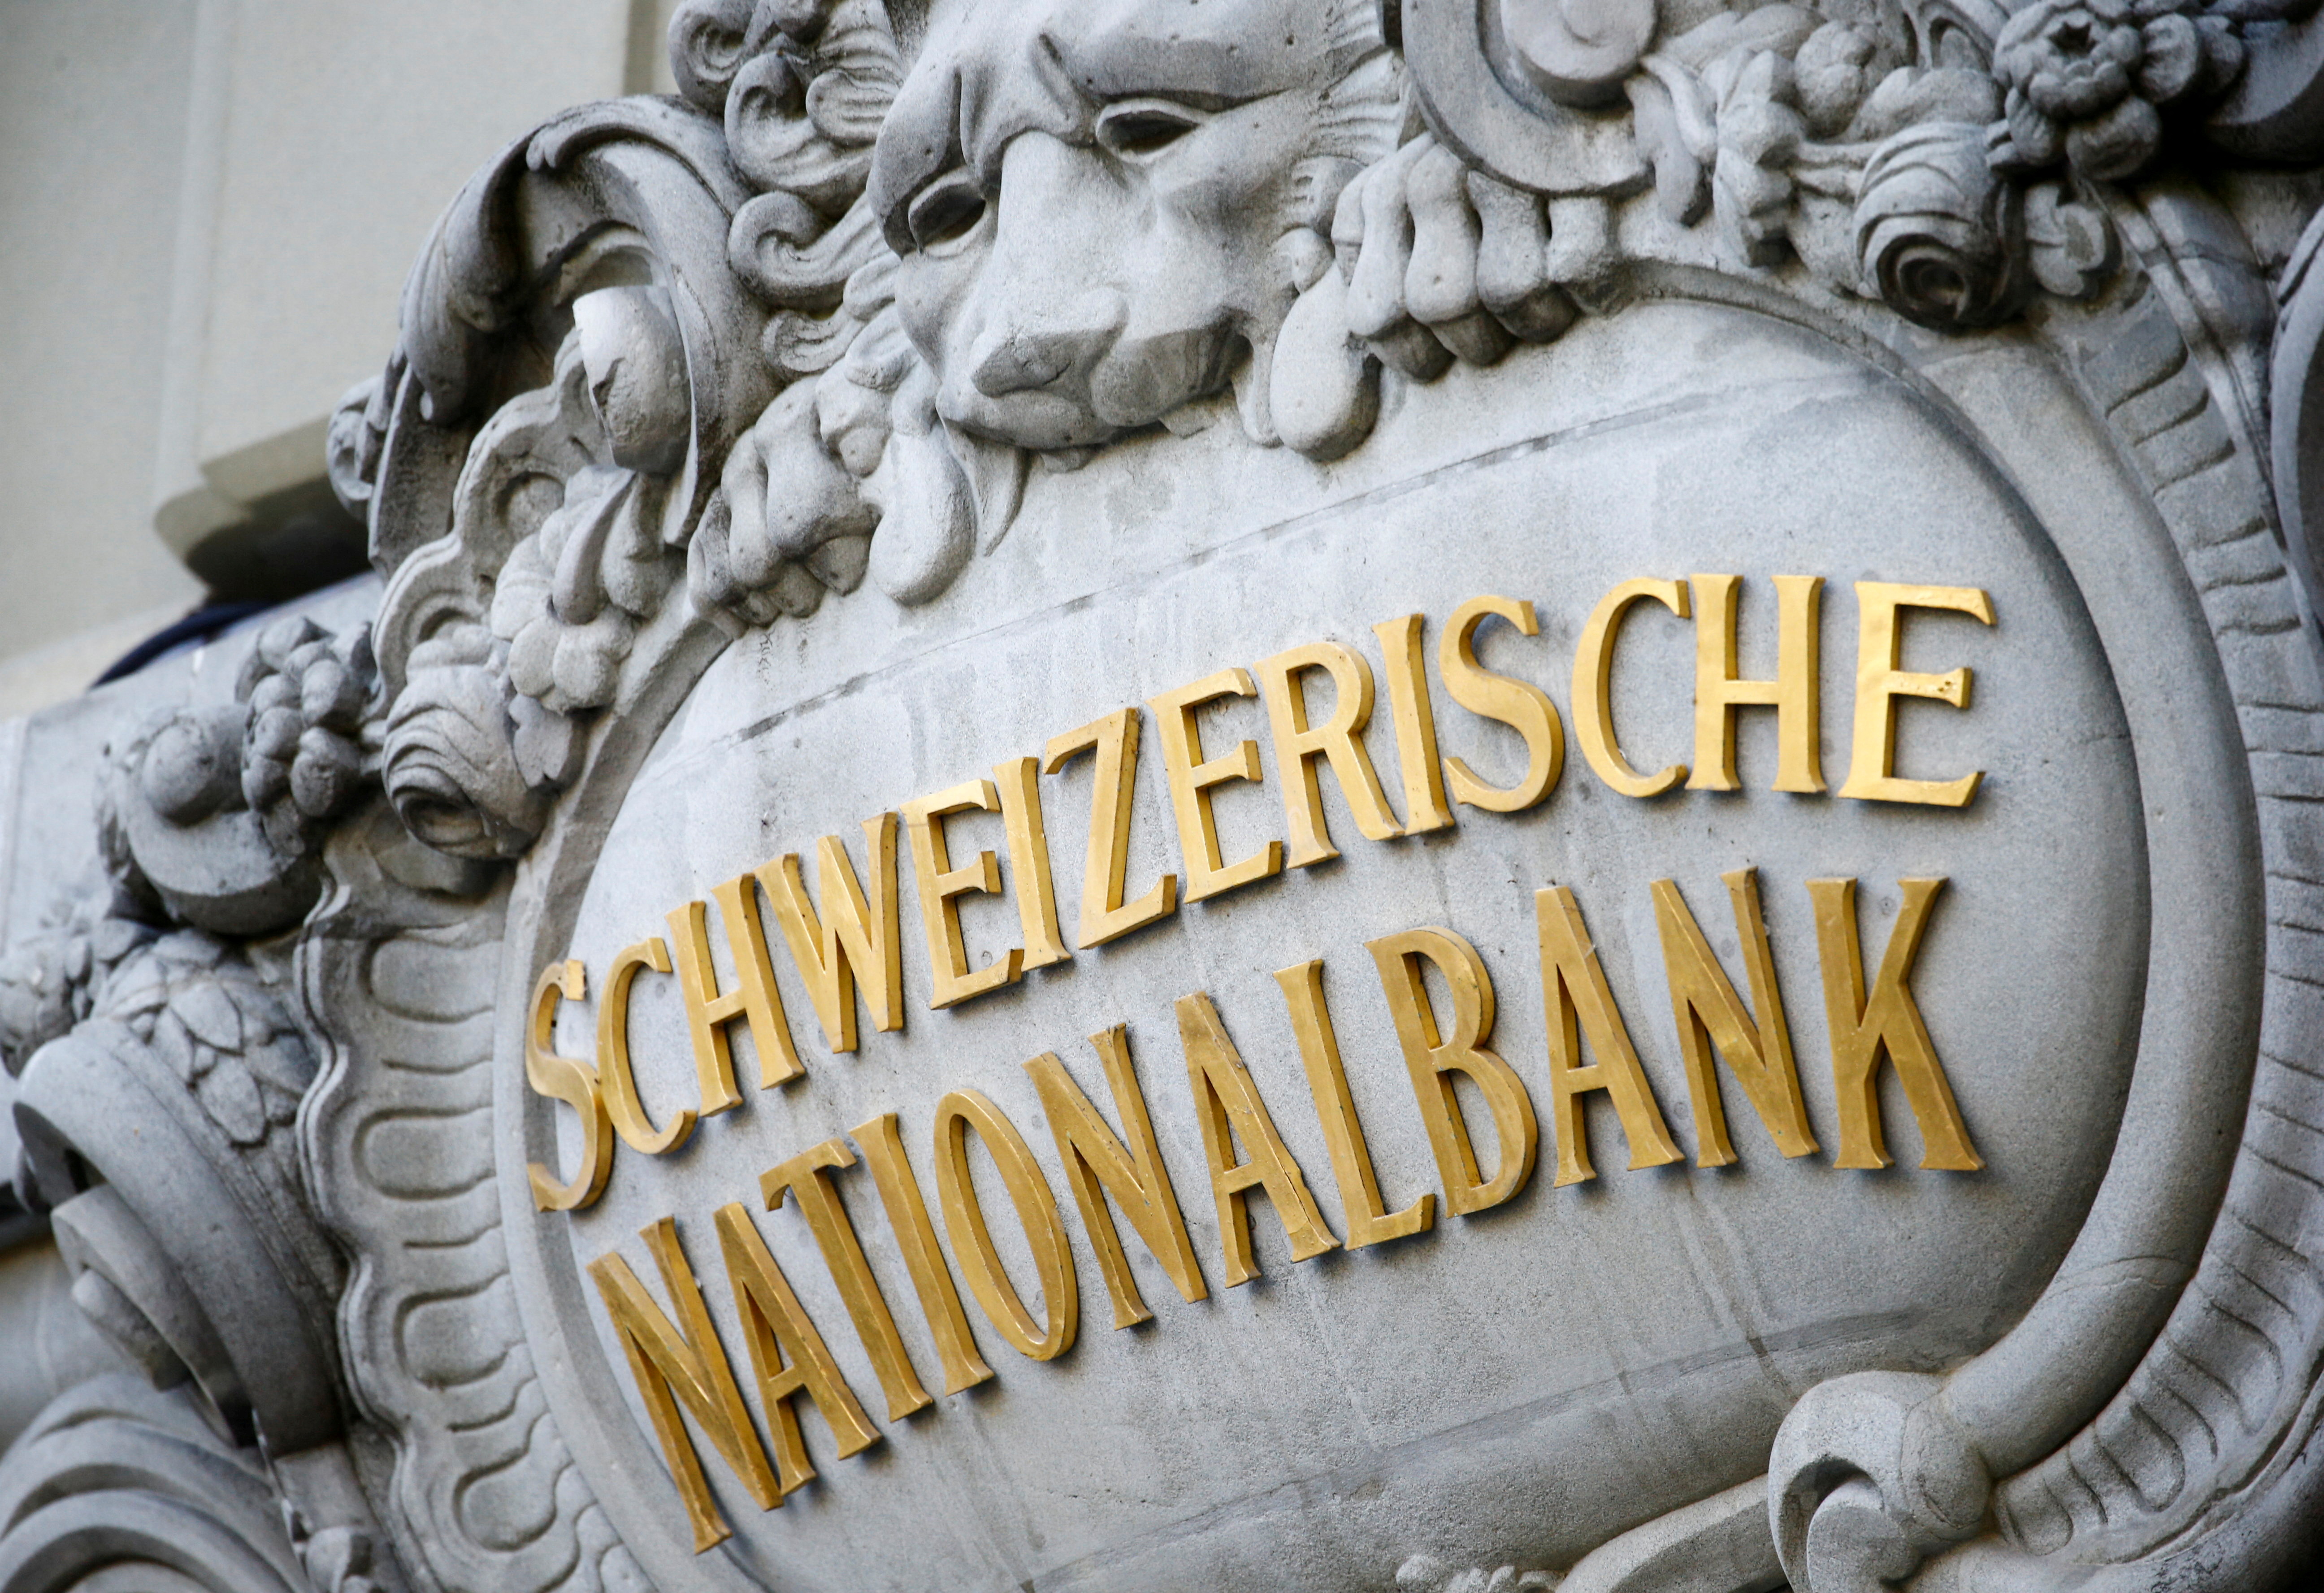 The Swiss National Bank (SNB) logo is pictured on its building in Bern